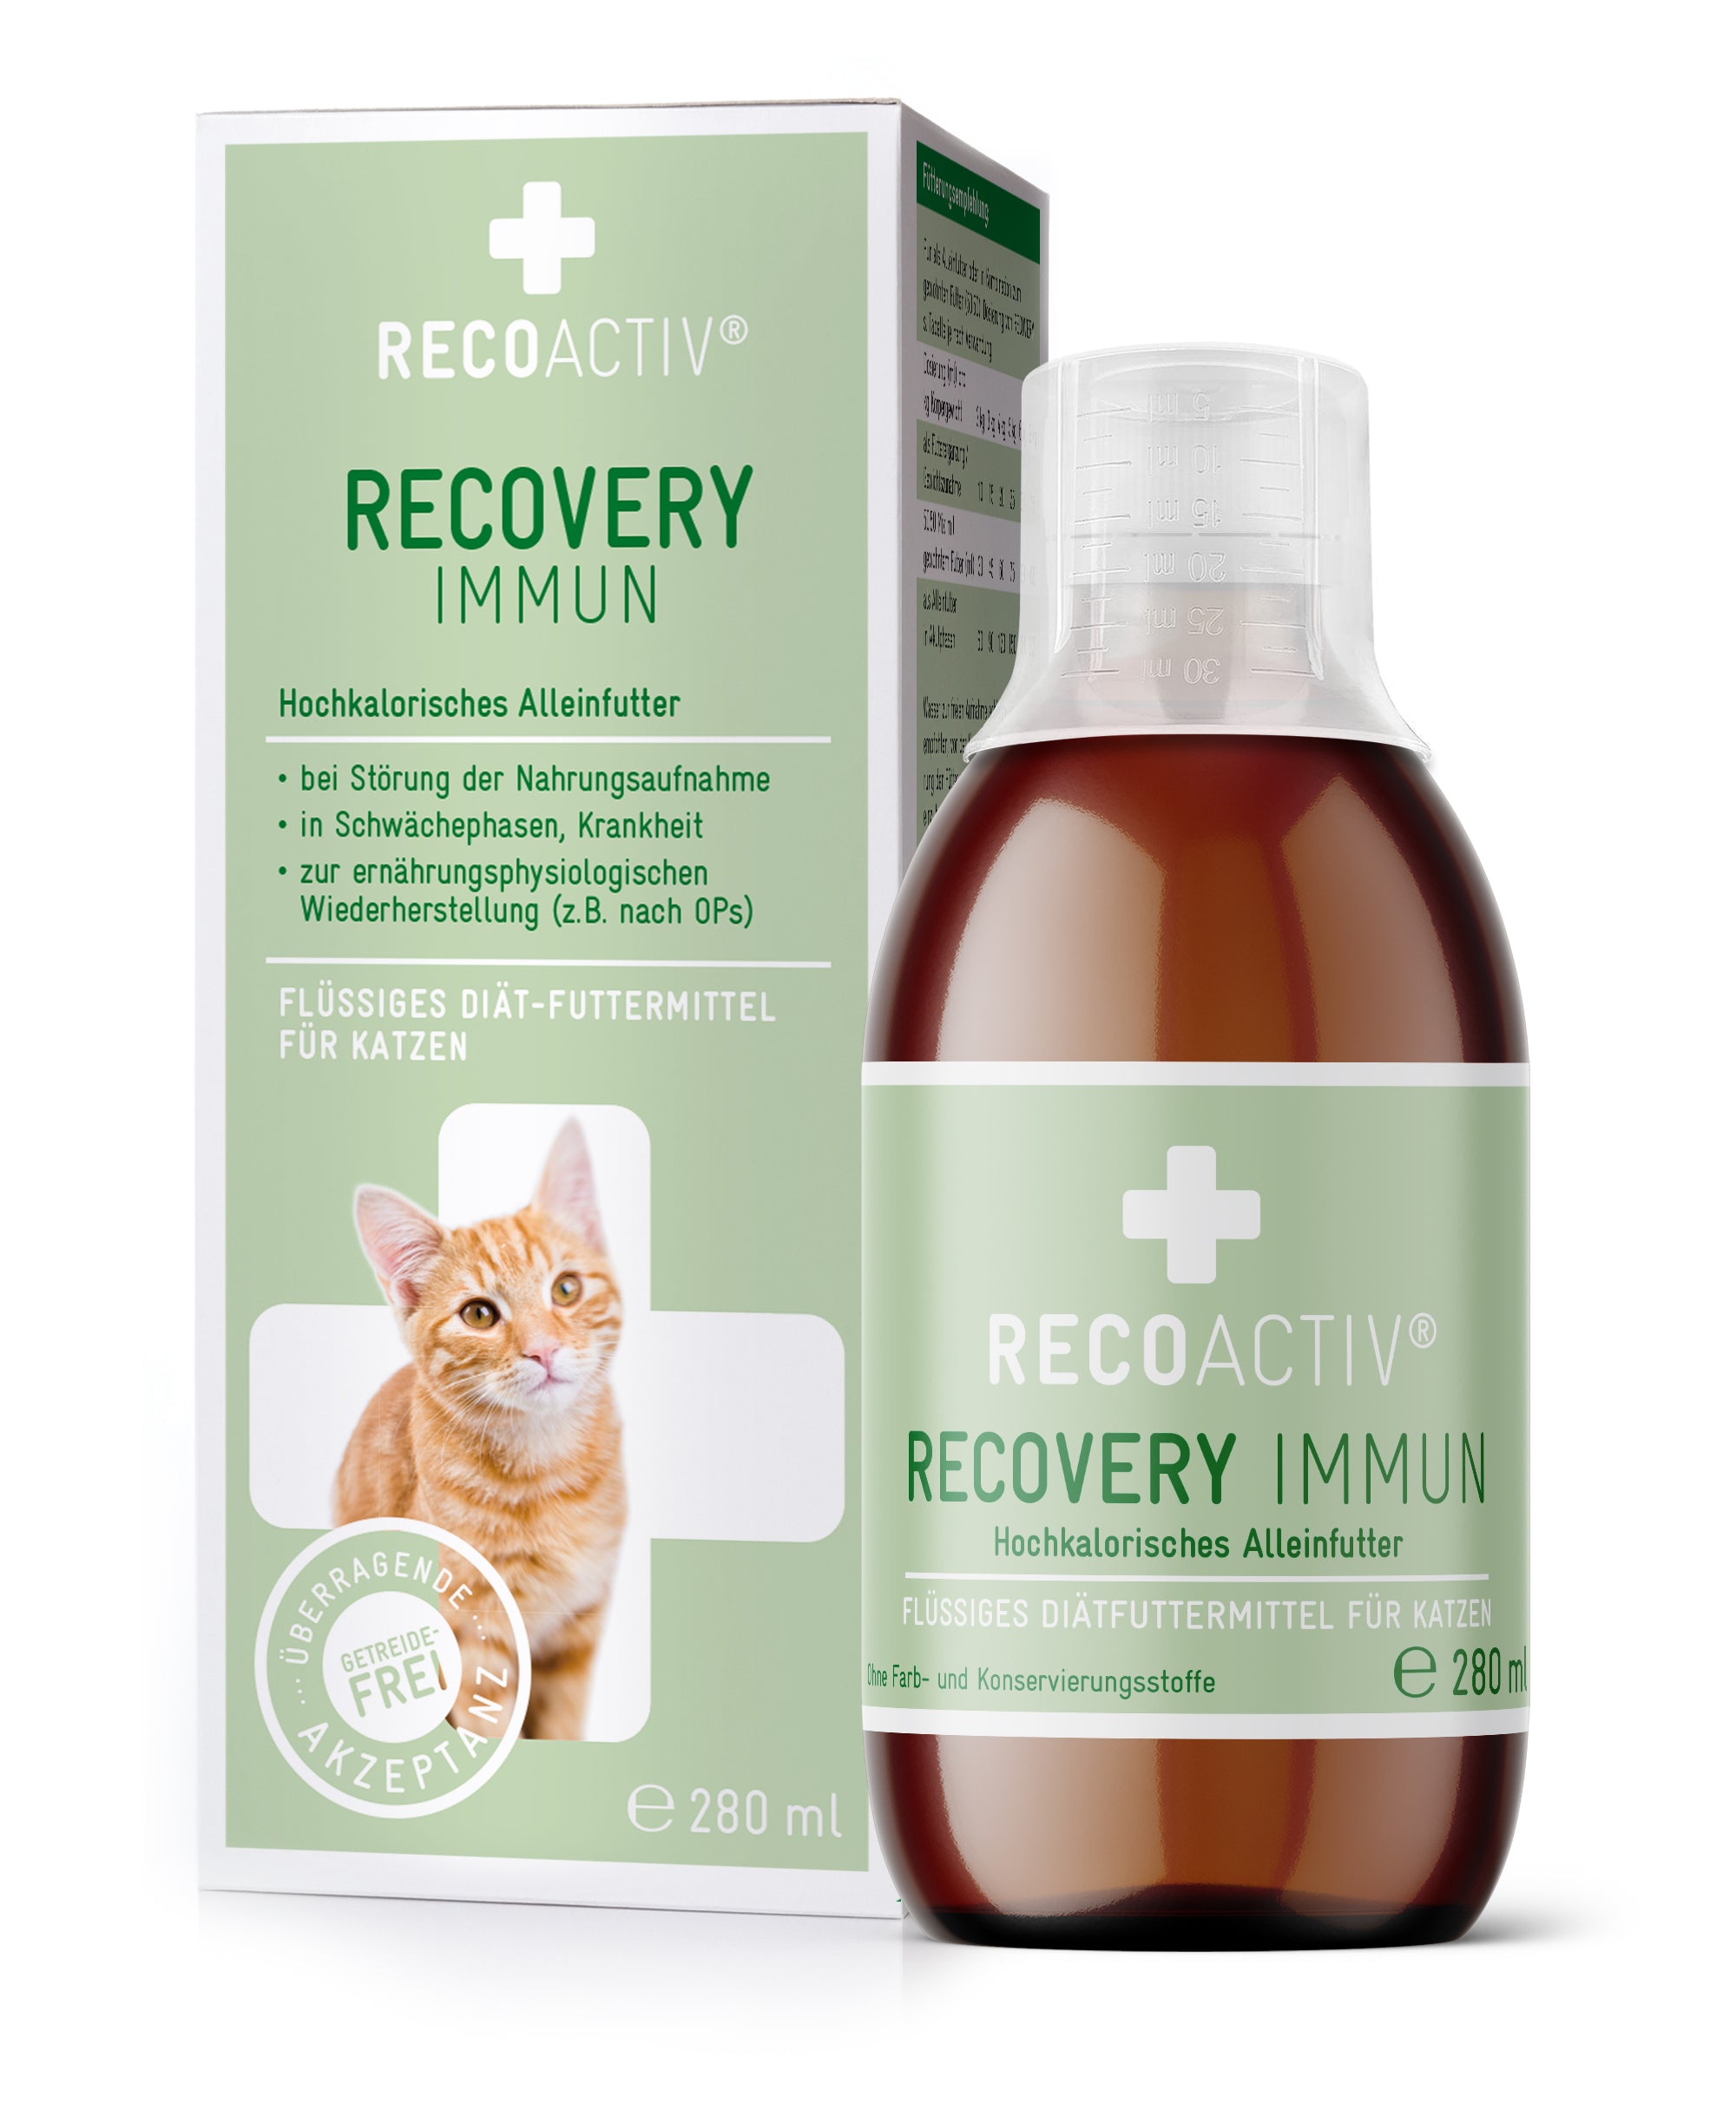 RECOACTIV® Recovery Immune Tonic